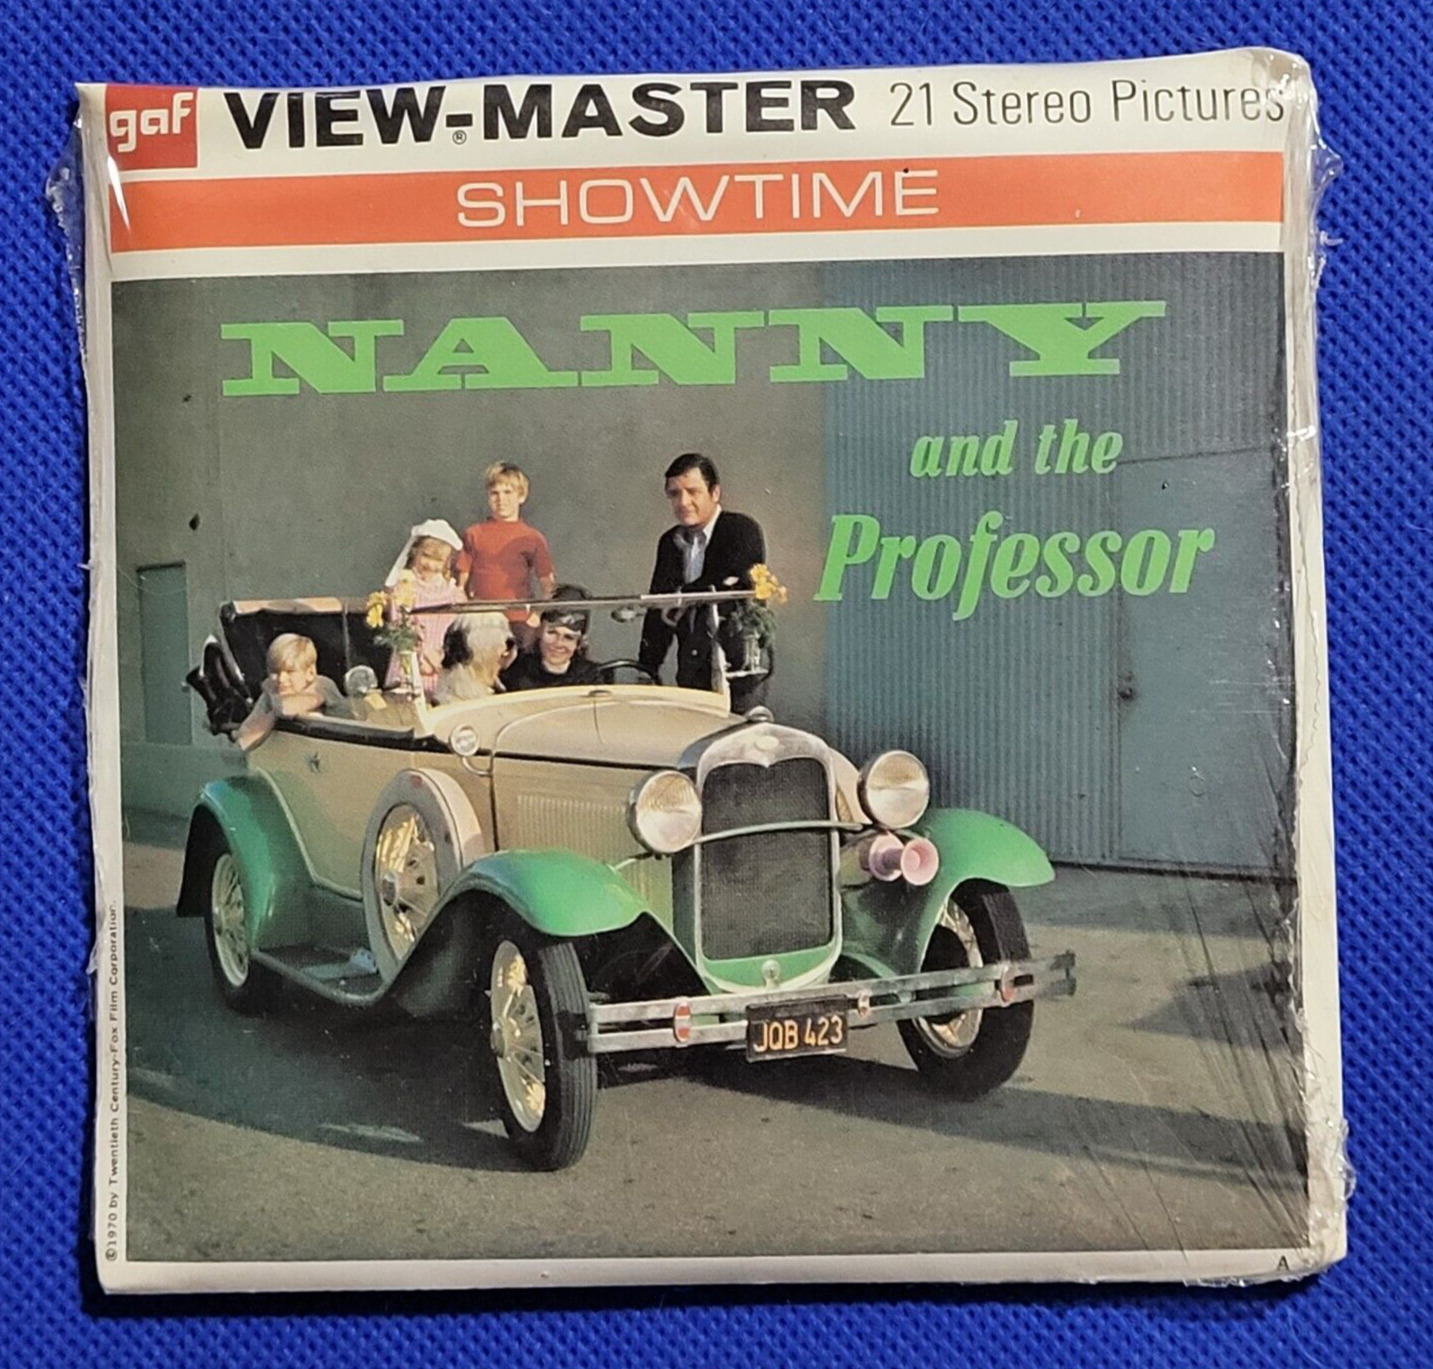 SEALED gaf B573 Nanny and the Professor TV Show  view-master 3 Reels Packet